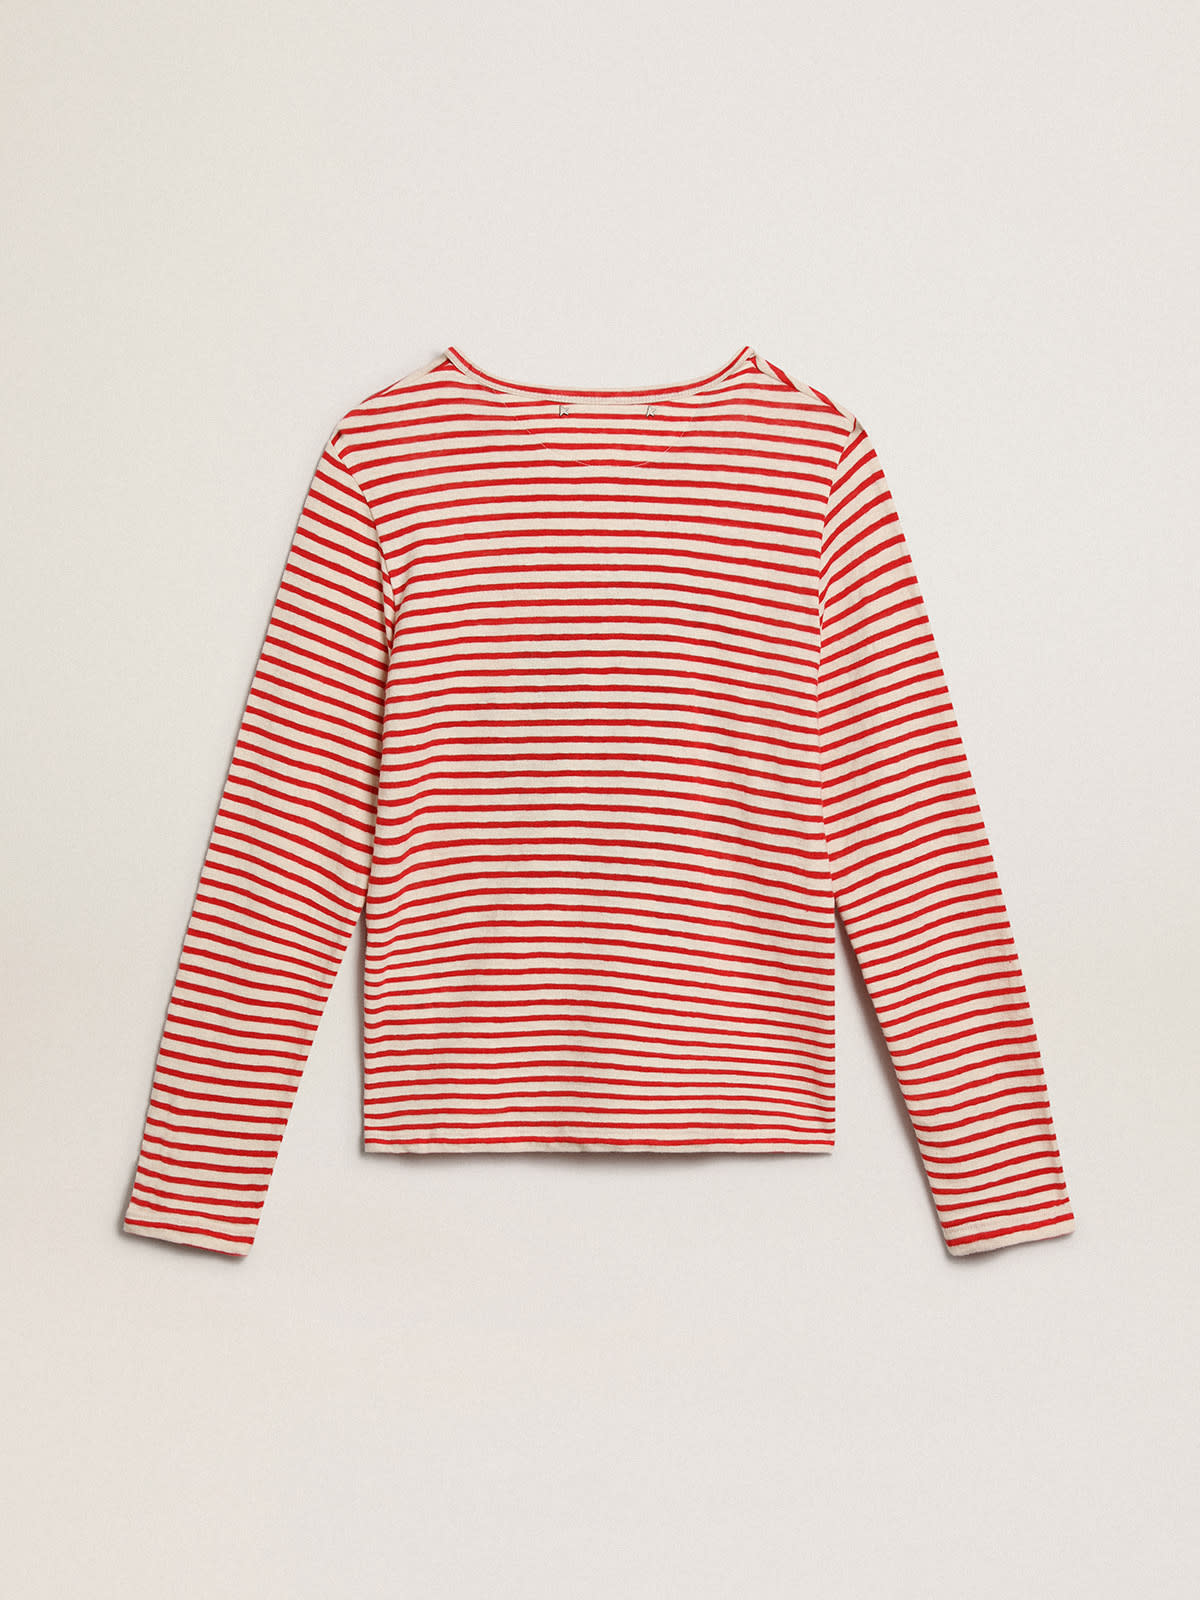 Golden Goose - Women's T-shirt with white and red stripes and embroidery on the front in 